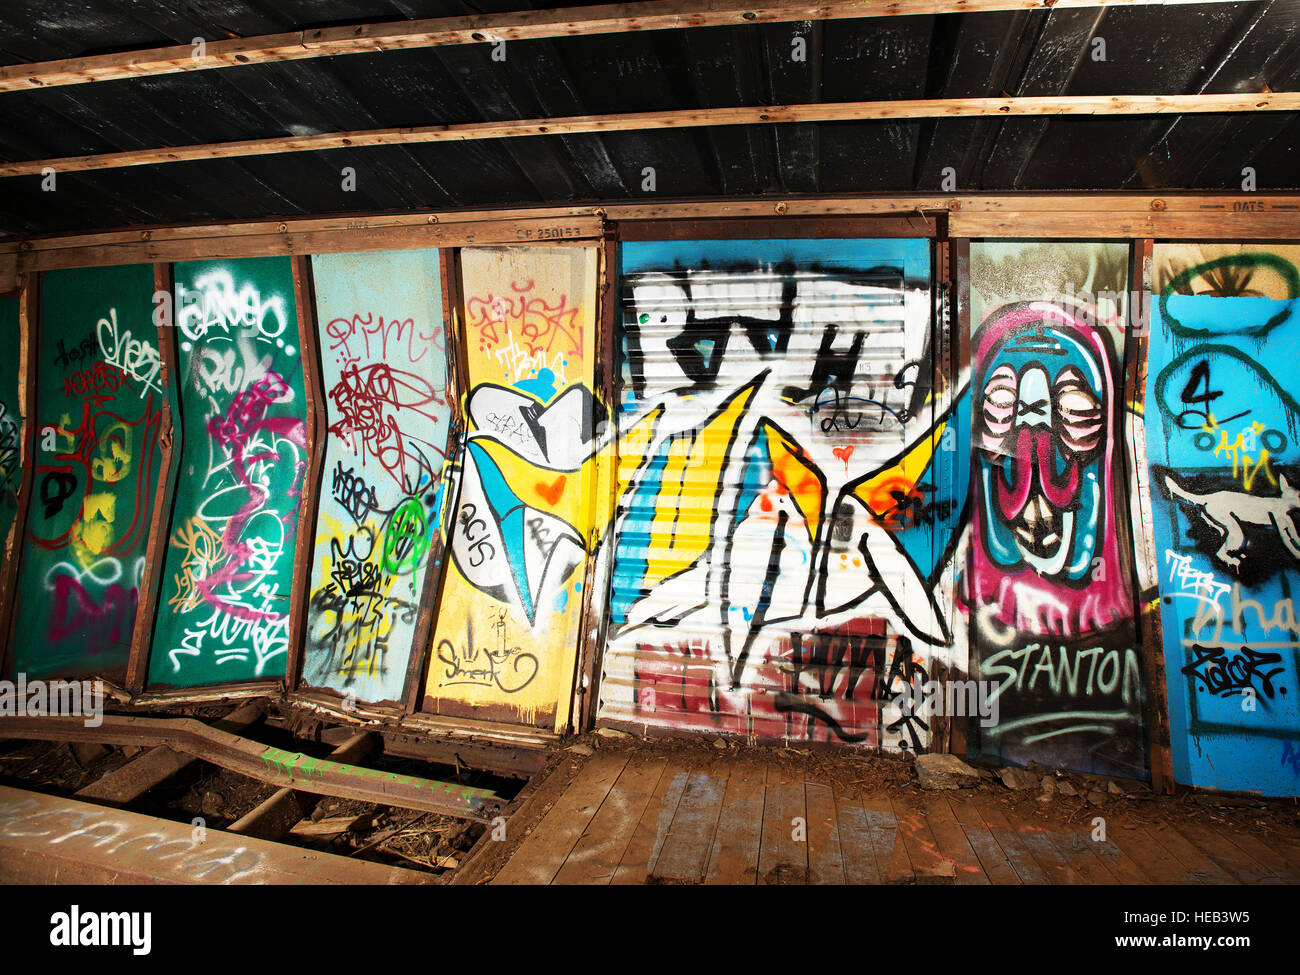 The Train Wreck trail.  The wrecked box cars left over from a 1950's PGE railway derailment, now a popular spot for local graffiti artists. Stock Photo